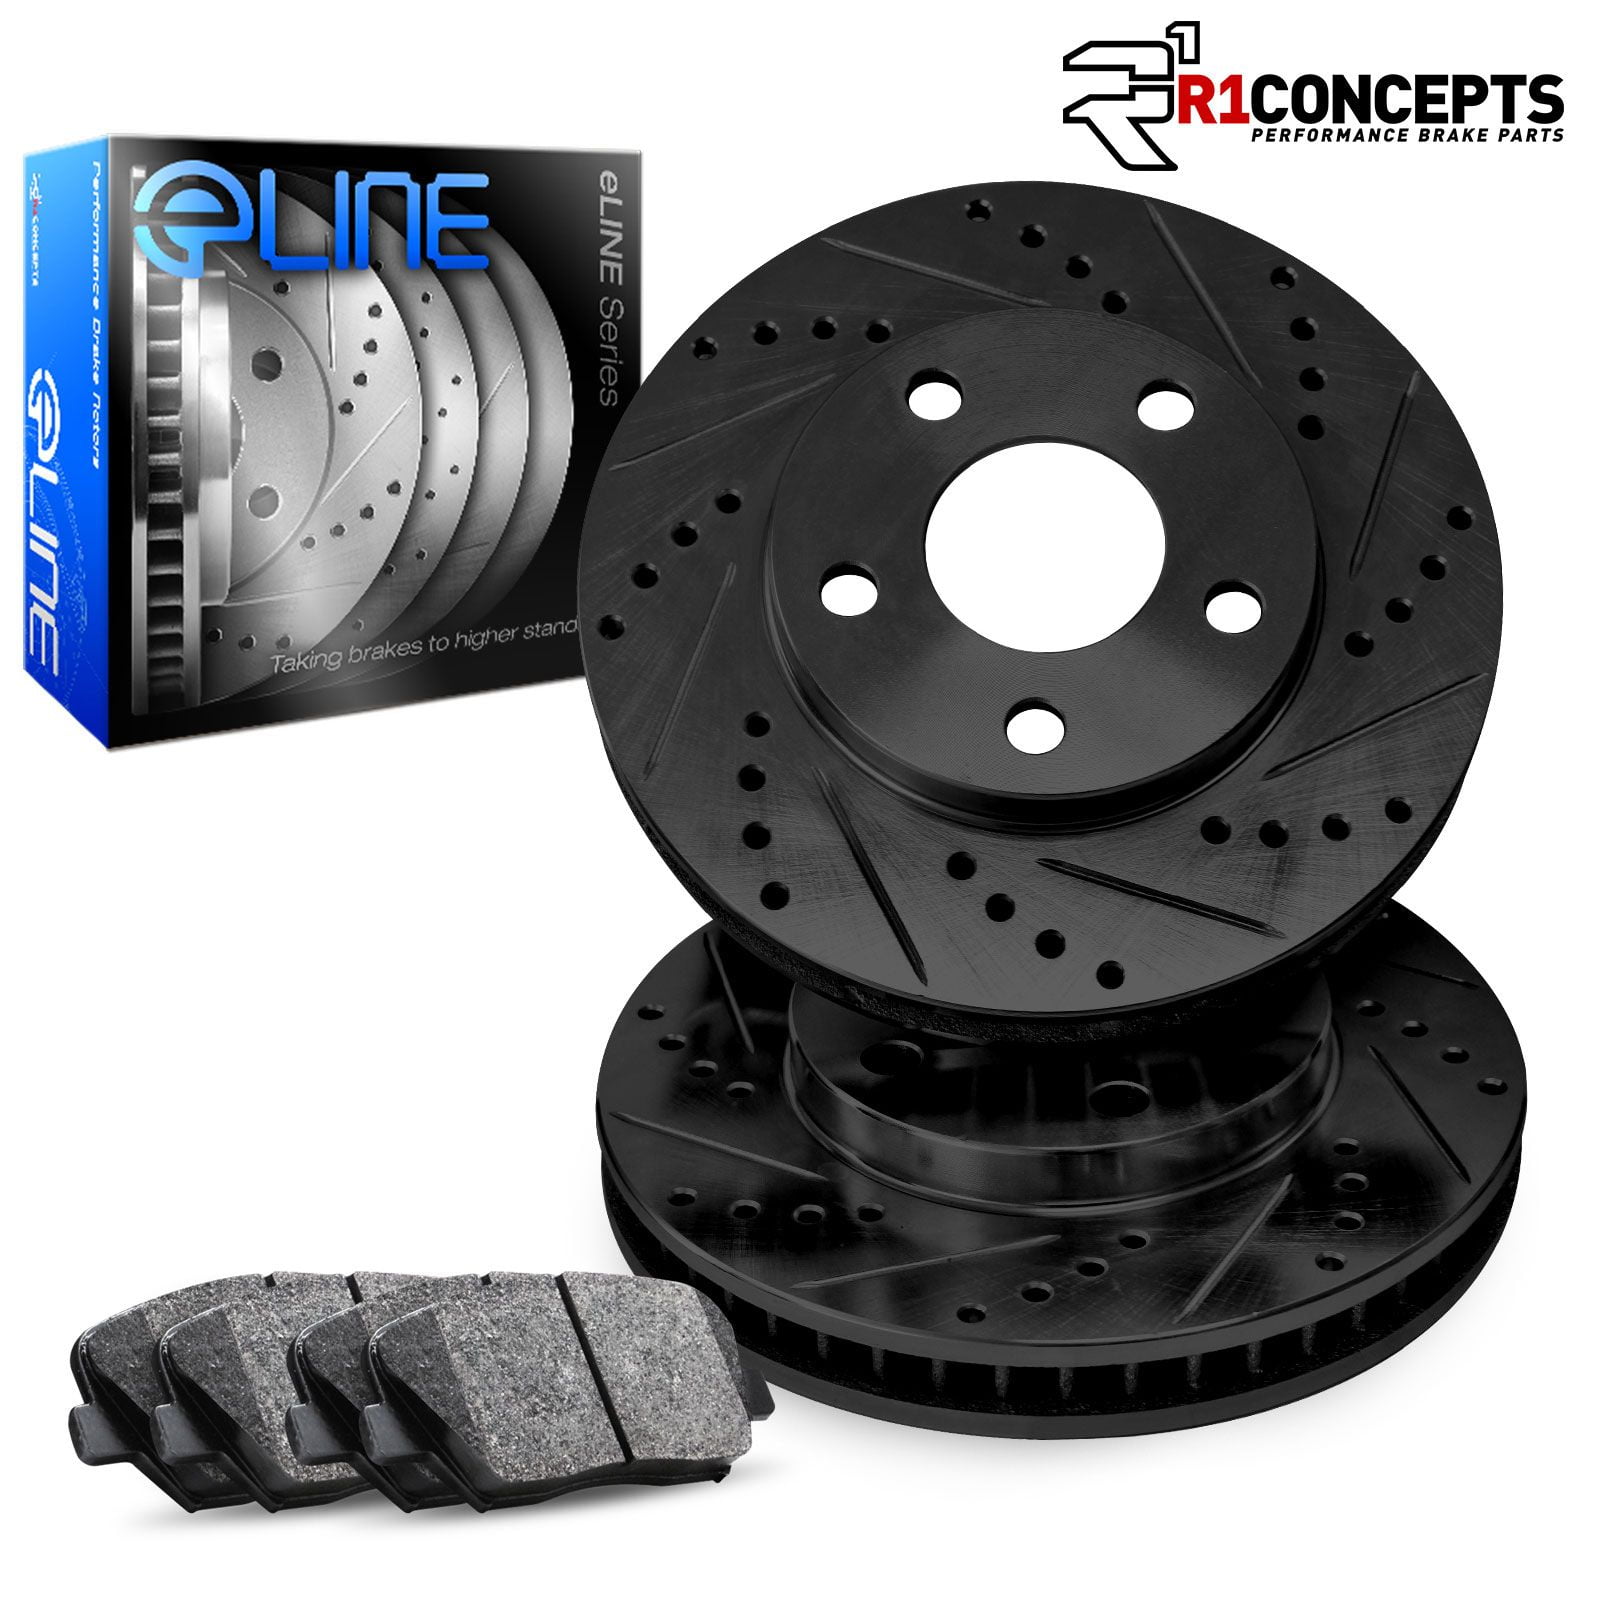 Premium Slotted Drilled Rotors + Ceramic Pads Max Brakes Front & Rear Performance Brake Kit KT059833 Fits: 2003 03 2004 04 2005 05 Ford Crown Victoria